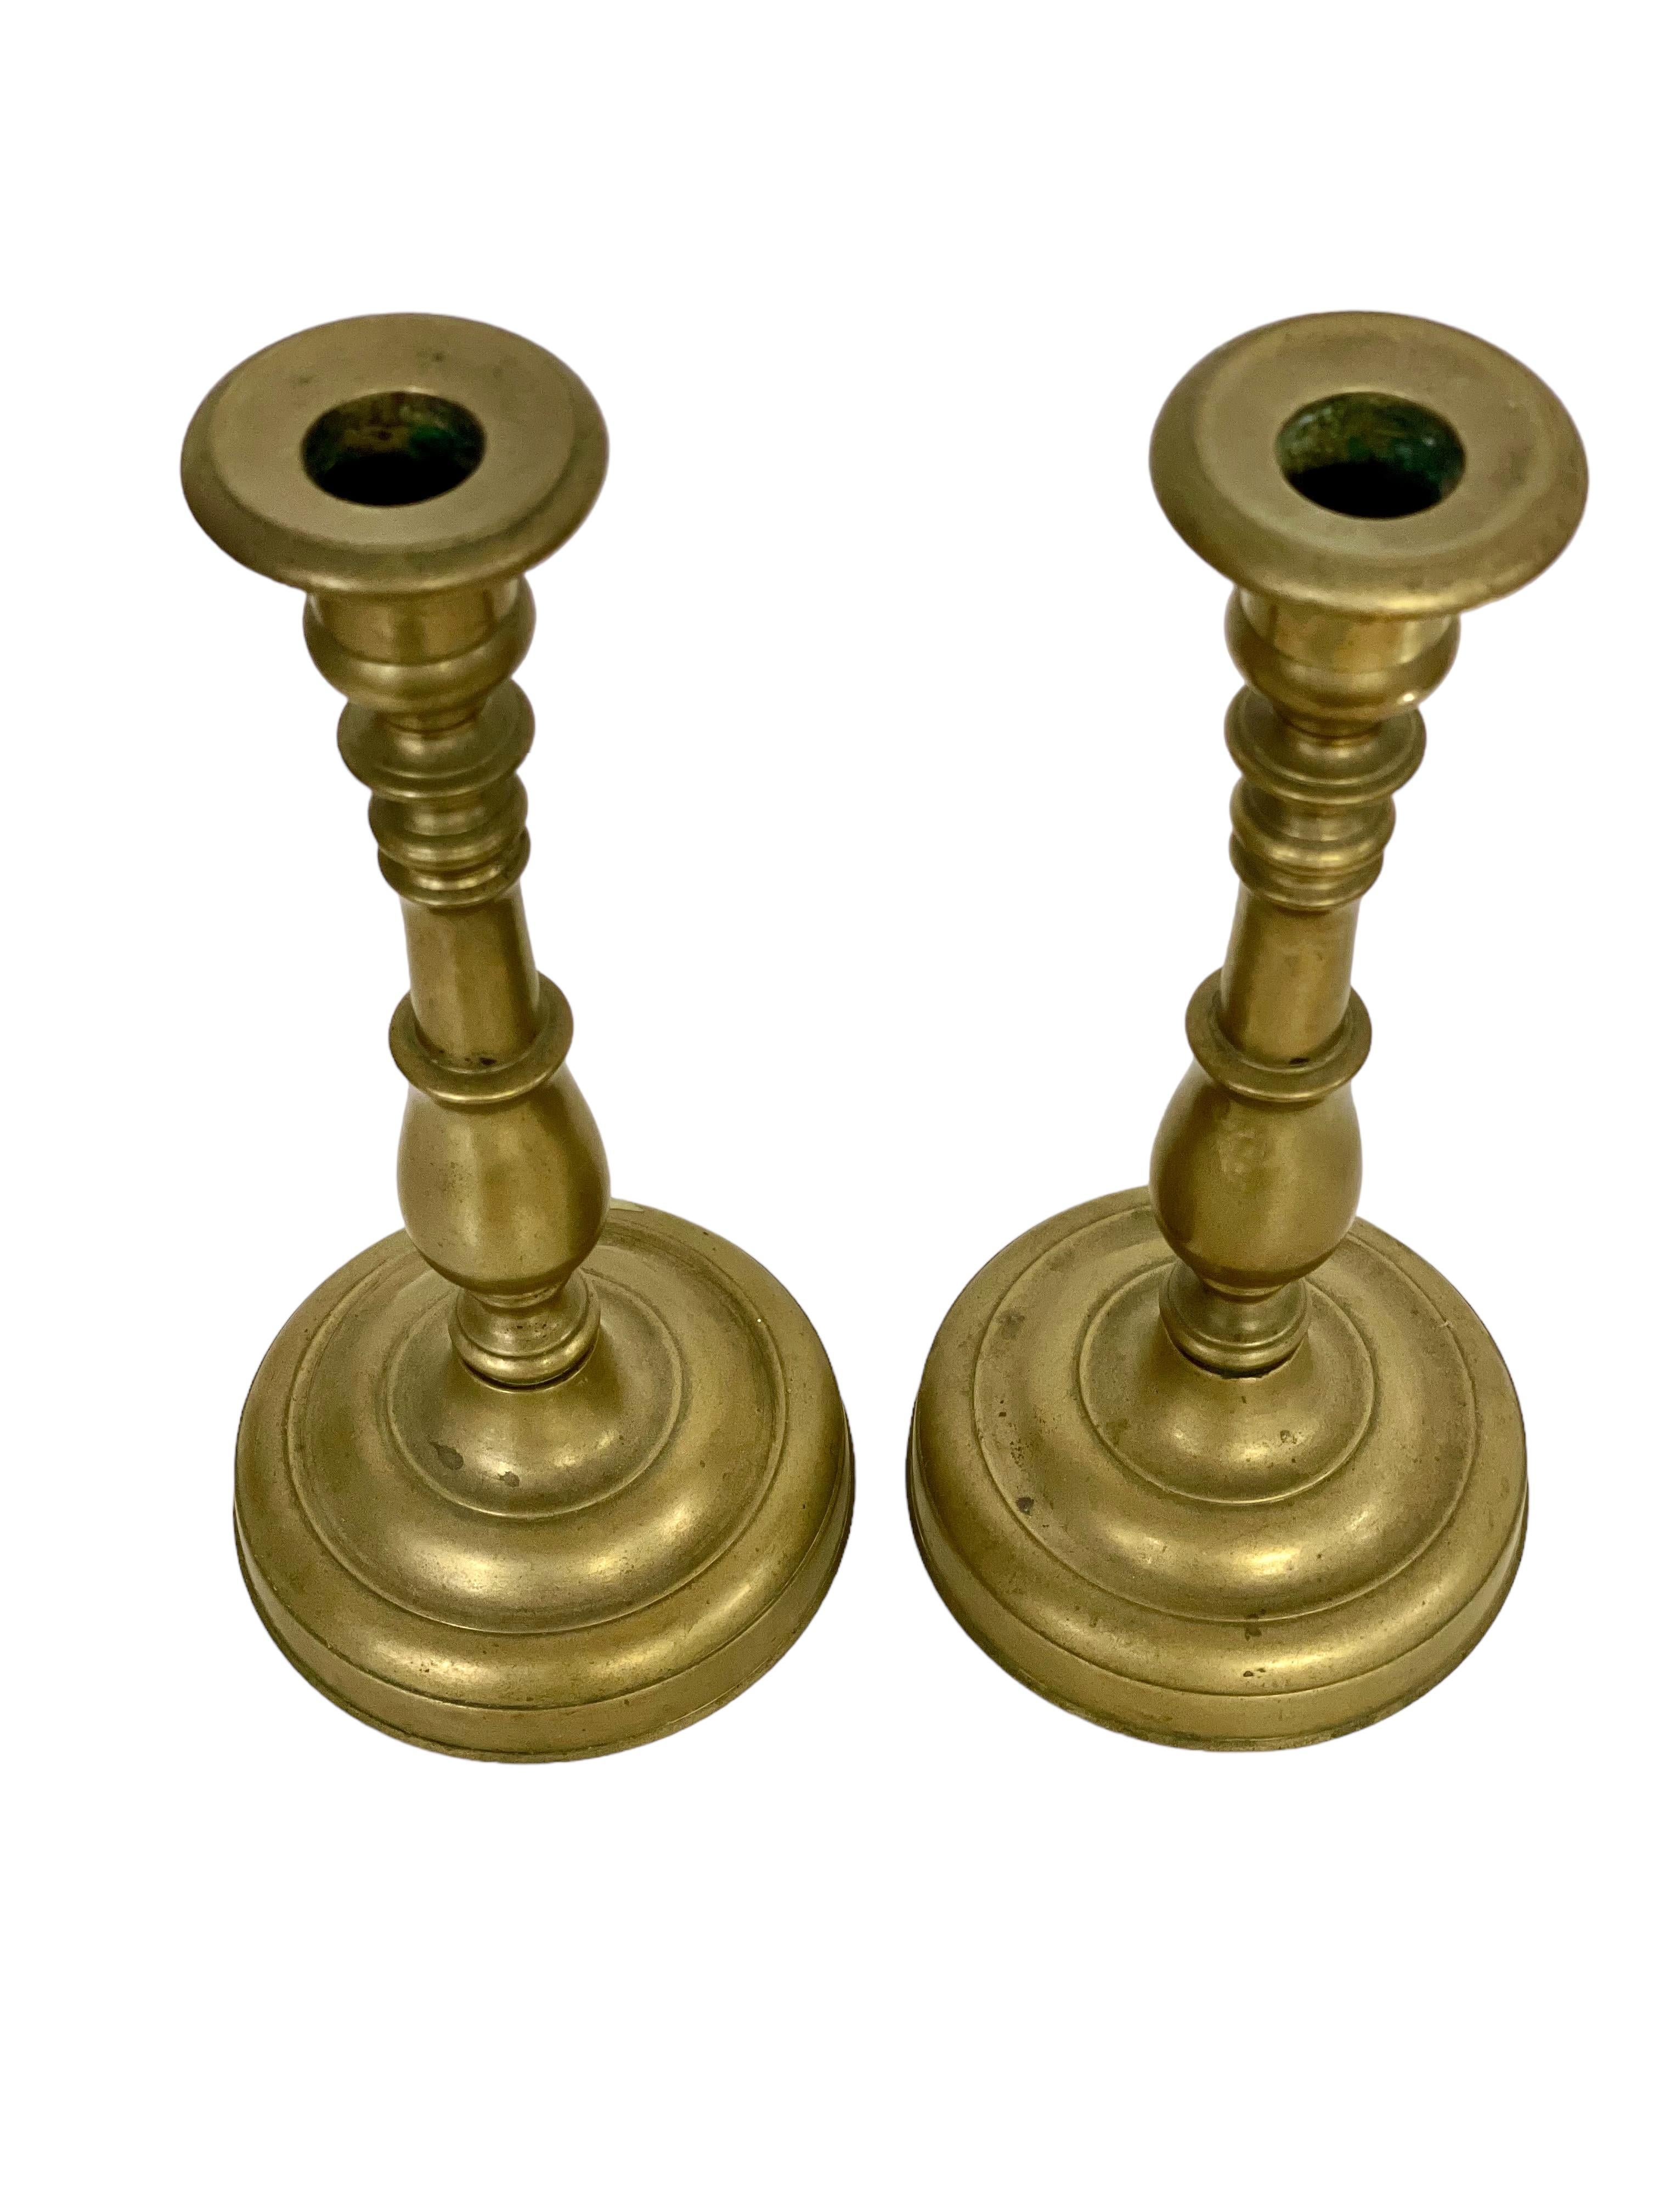 A simple and elegant pair of 19th century French “Flambeaux” gilt bronze candlesticks crafted in a traditional baluster form, rising above a heavy circular base. The turned and knopped stem terminates in a well shaped capital and wide, flared